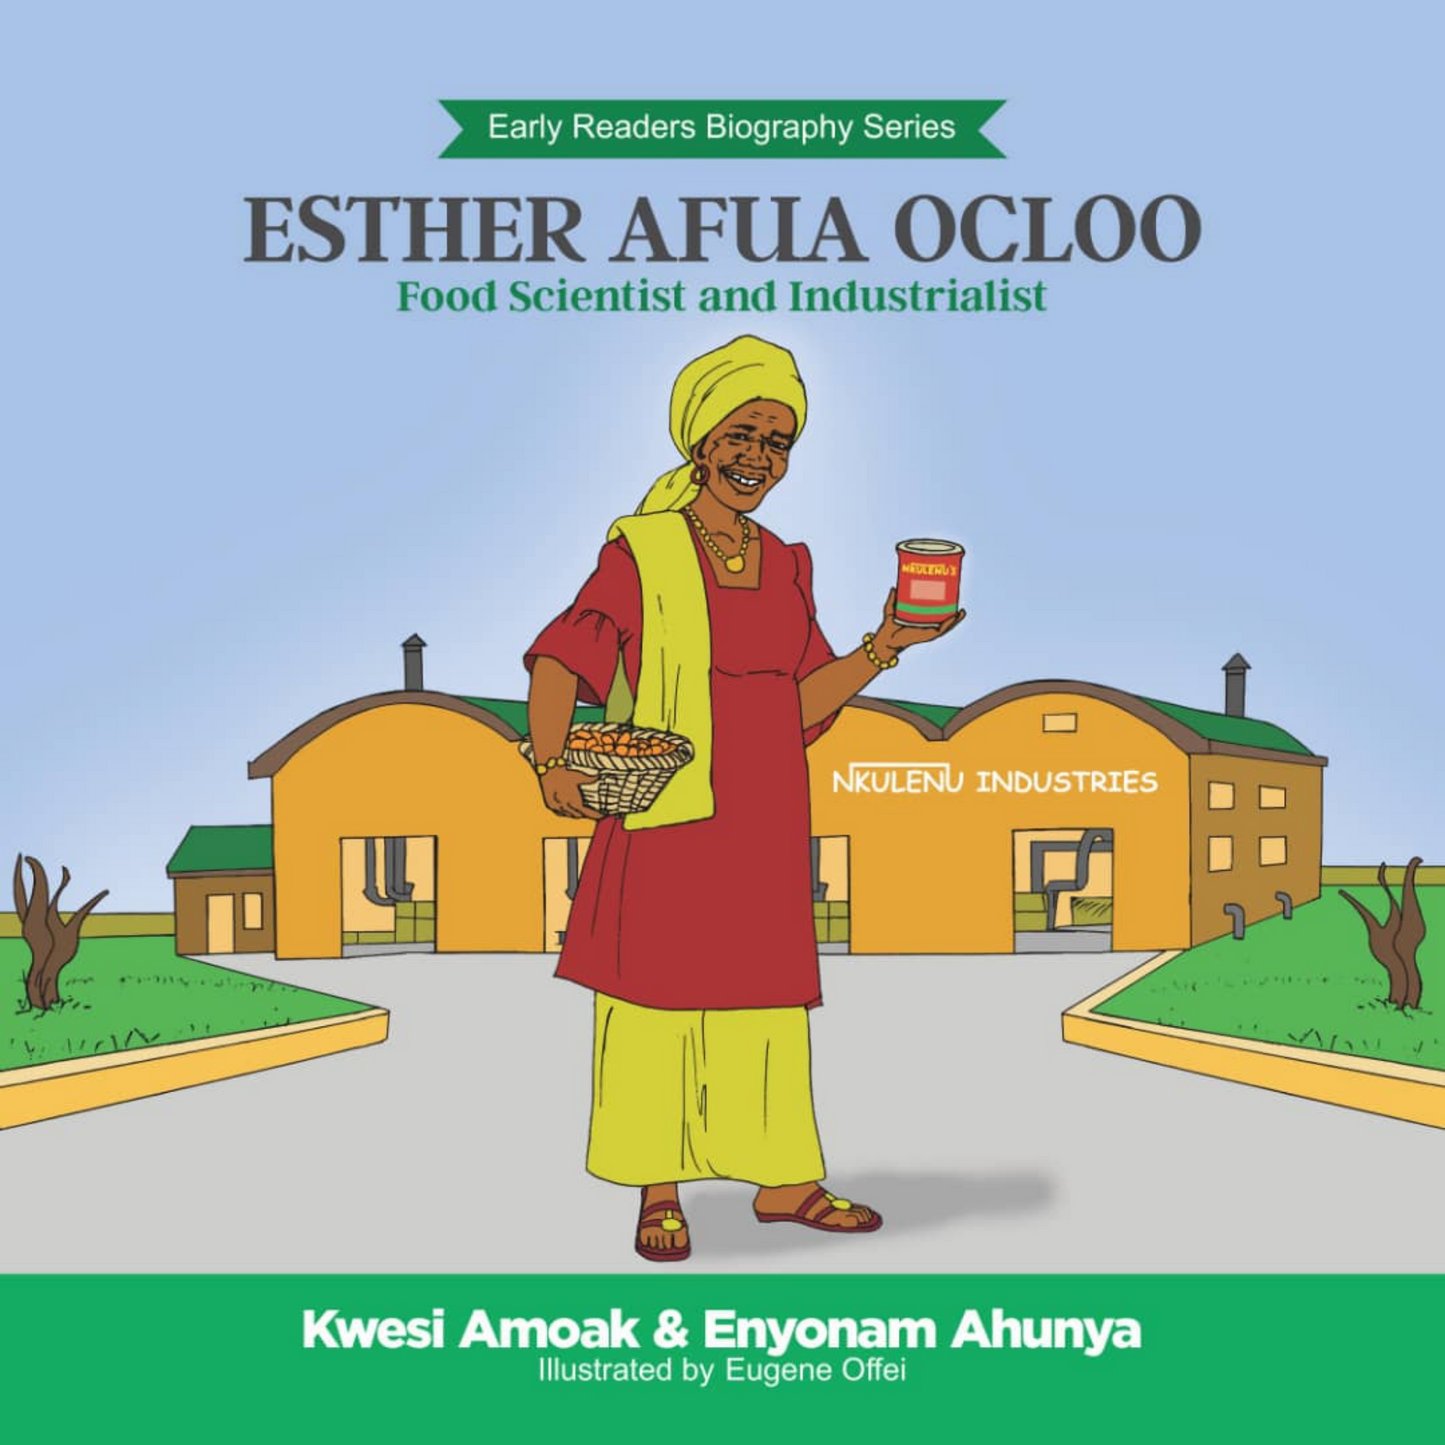 Esther Afua Ocloo, Food Scientist and Industrialist